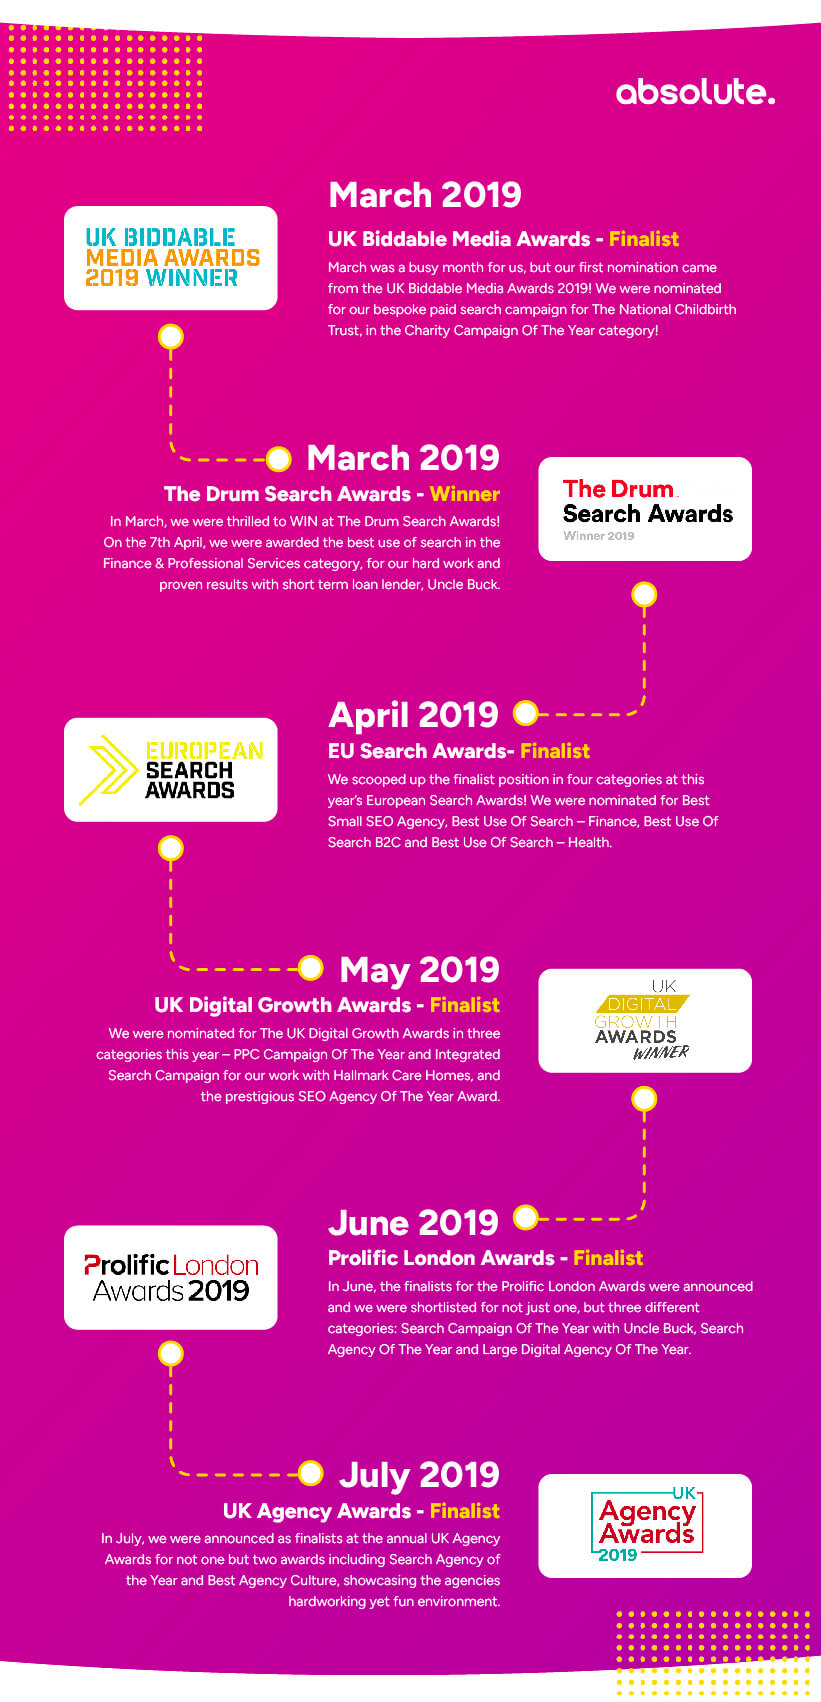 Awards won March 2019 to July 2019